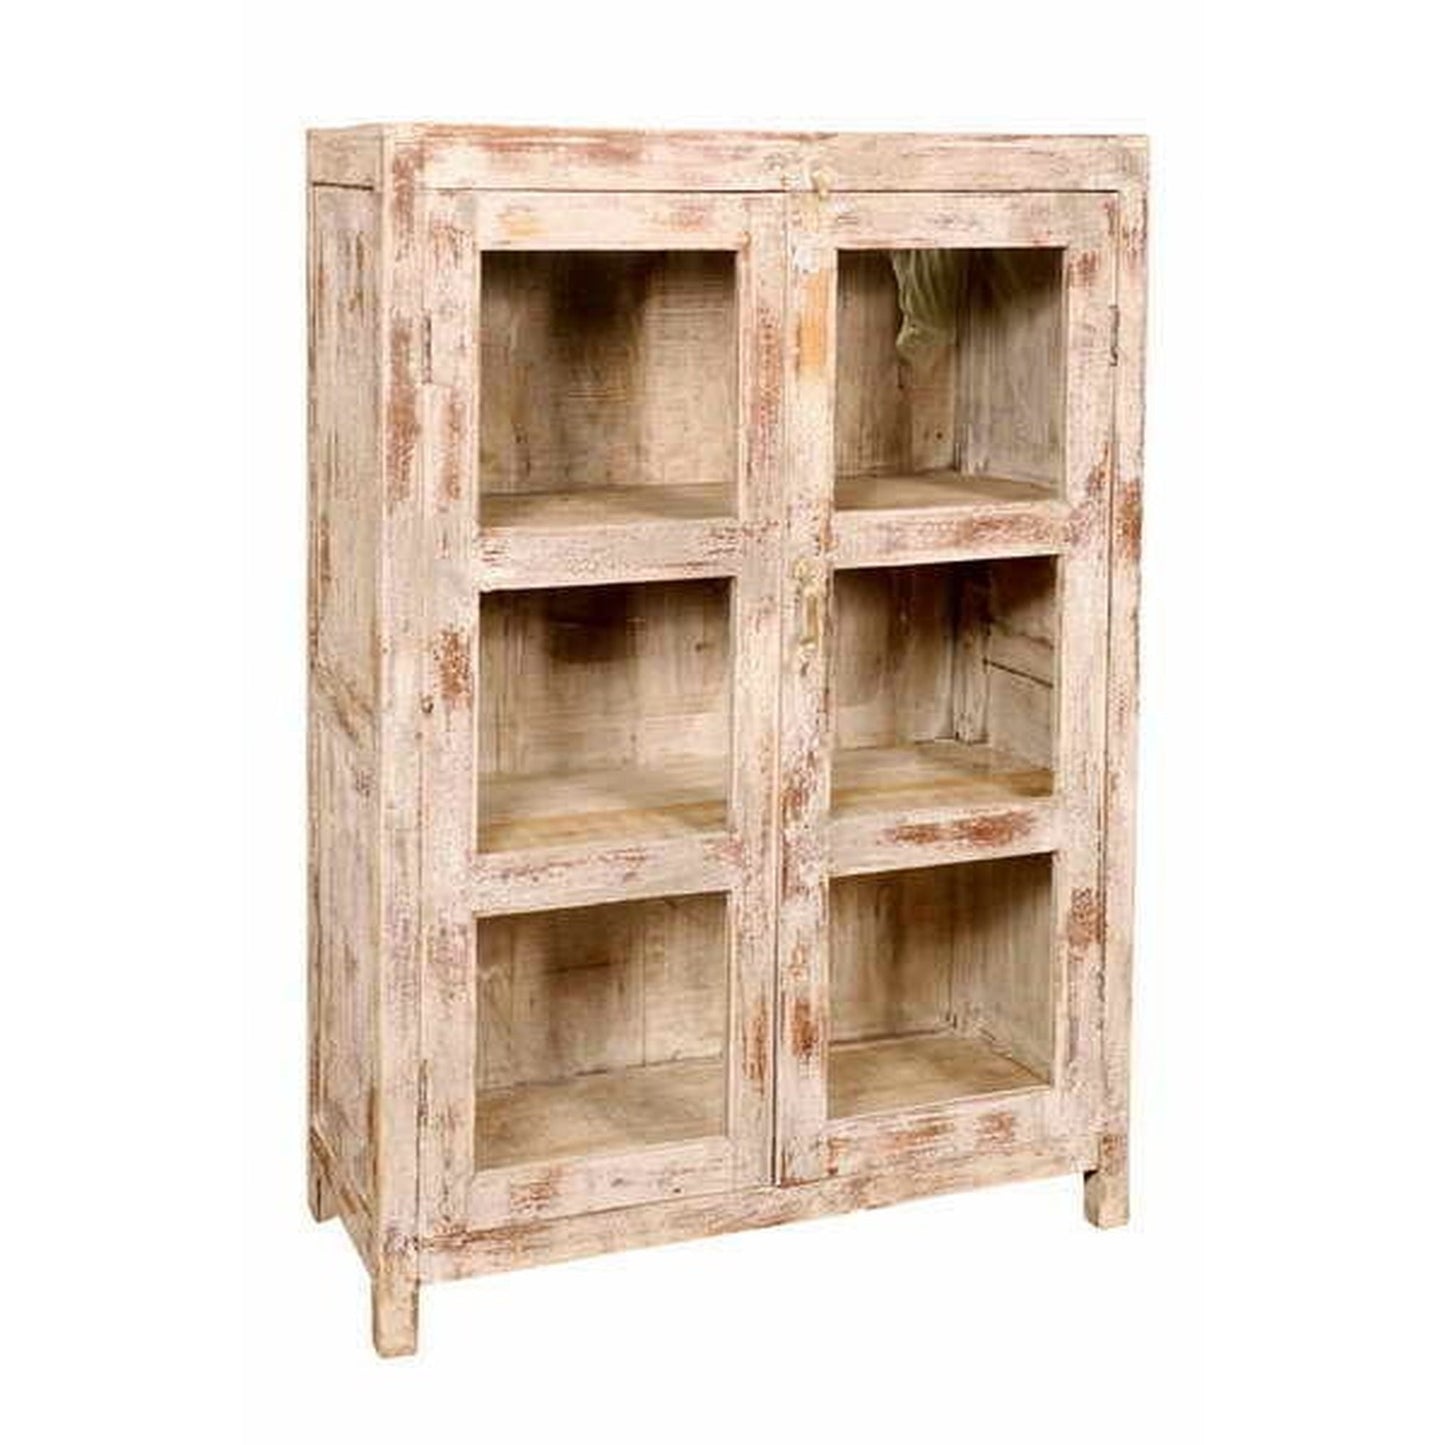 RM-052532, Wooden Cabinet With Glass